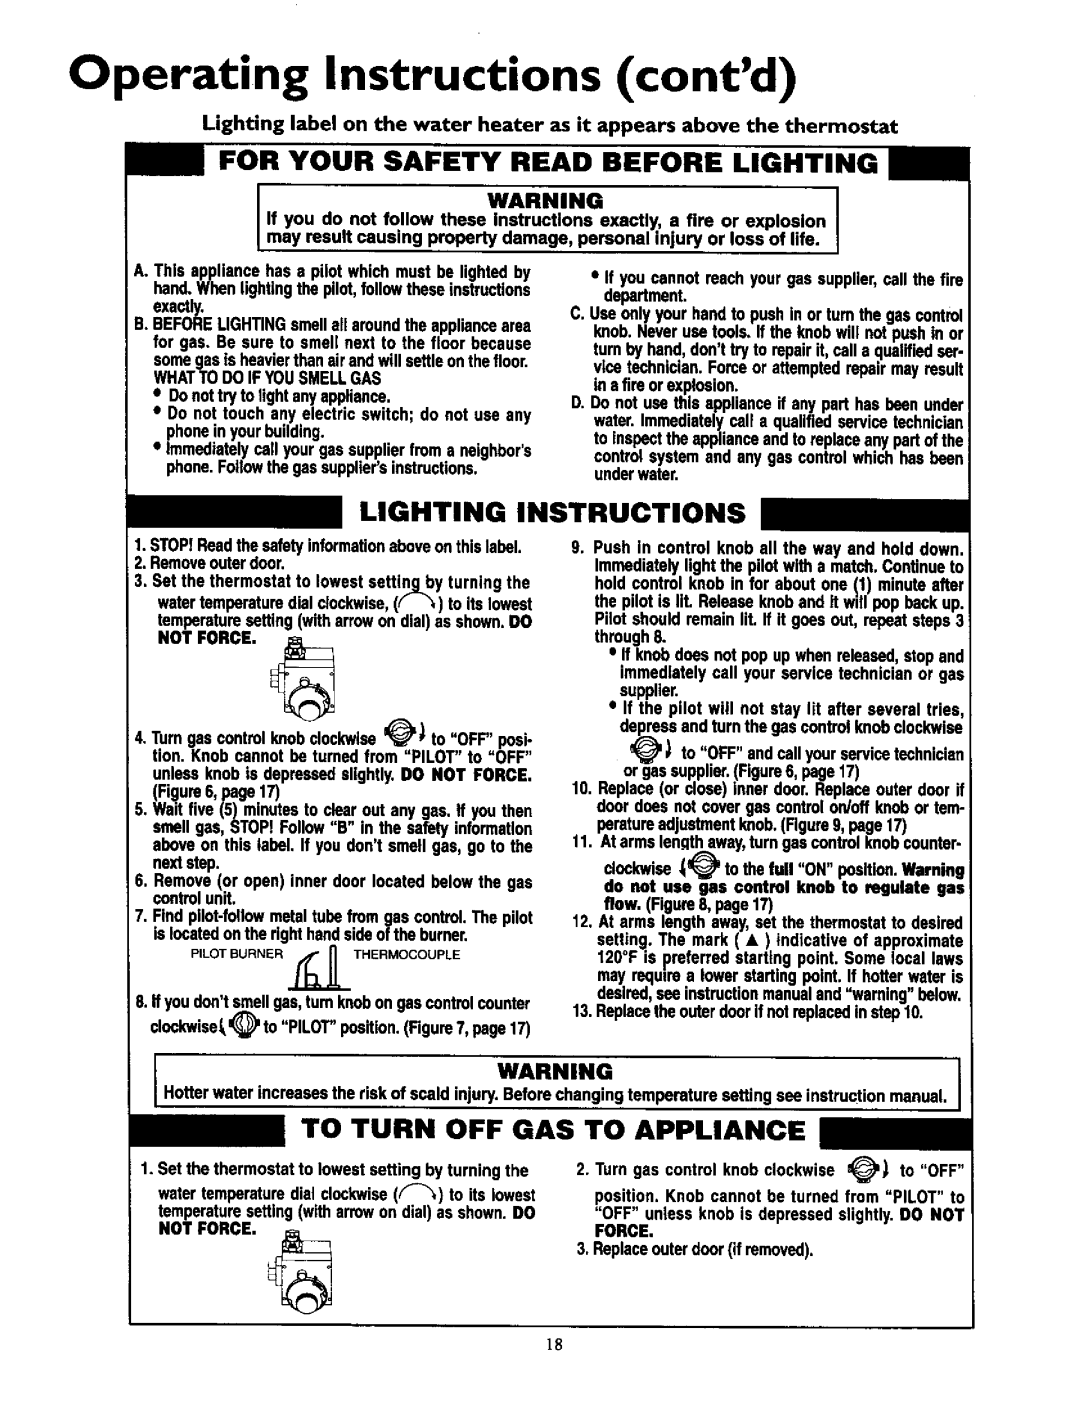 Kenmore 153.330451, 153.330501 Operating Instructions contd, For Your Safety Read Before Lighting, Lighting Instructions 